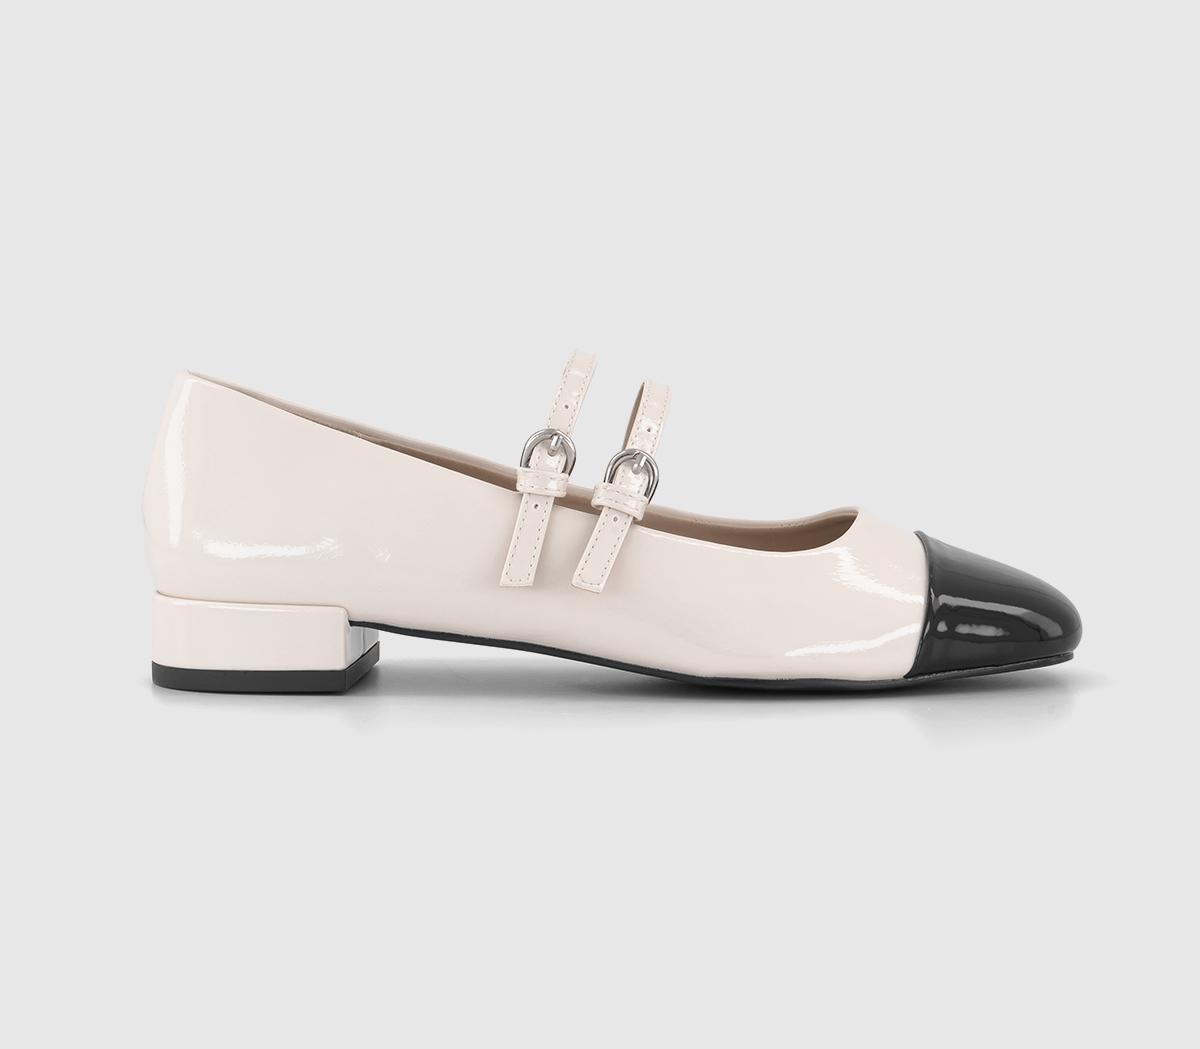 OFFICEFrenchkiss Patent Two Strap Mary JanesBlackwhite Mix